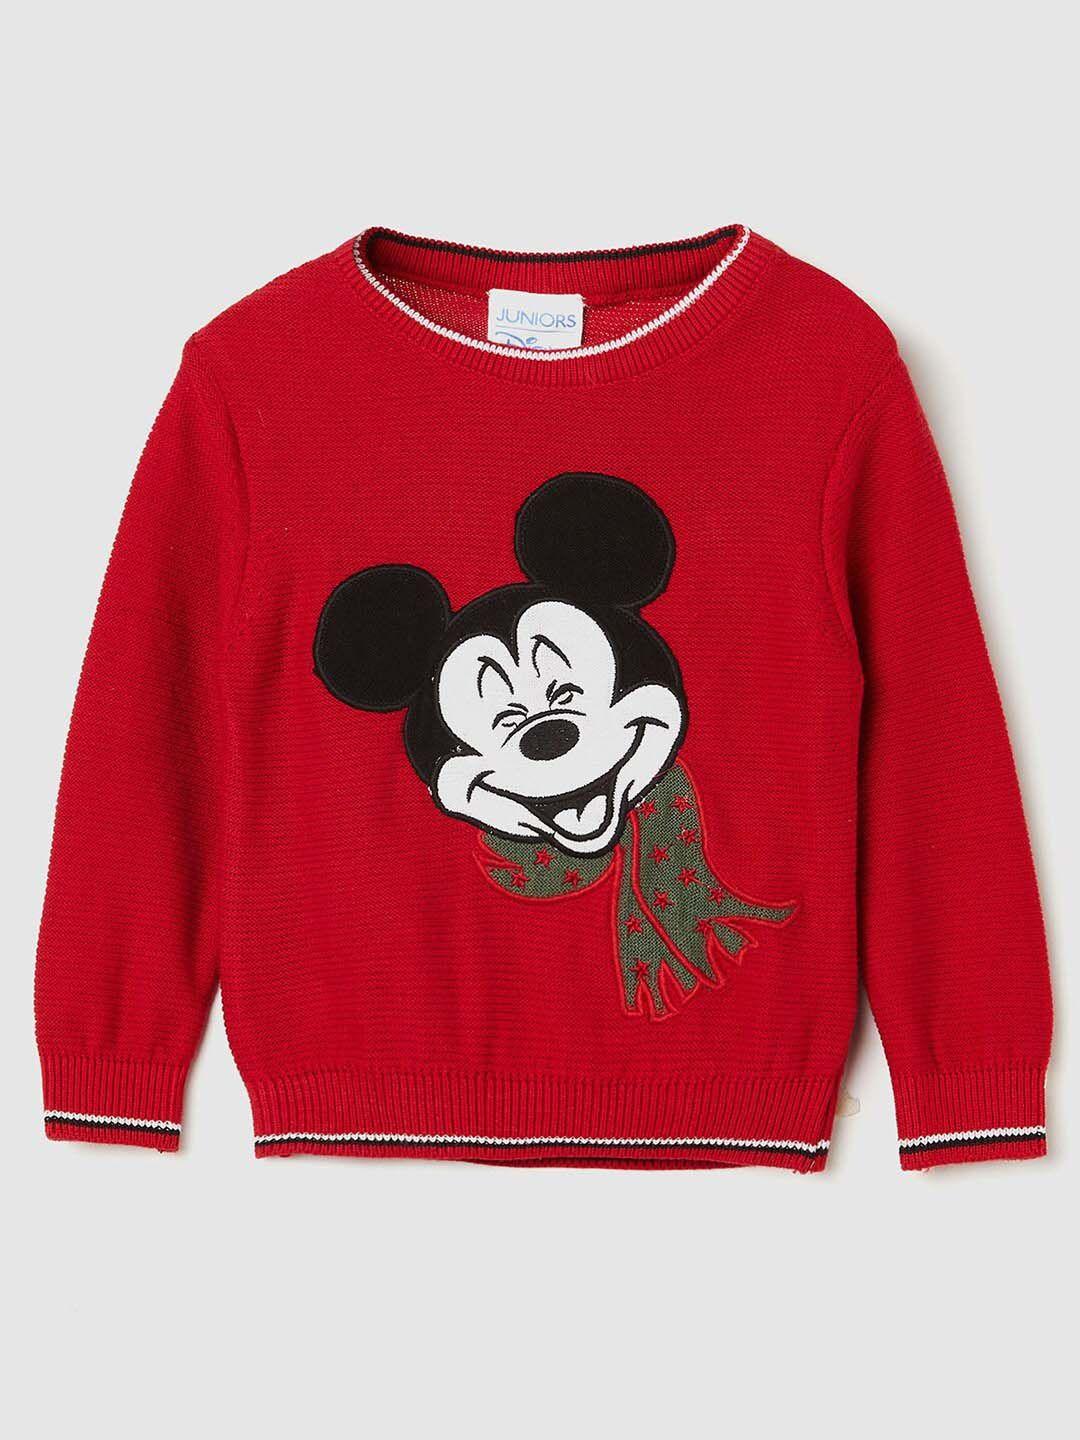 juniors-by-lifestyle-boys-red-&-white-printed-pure-cotton-pullover